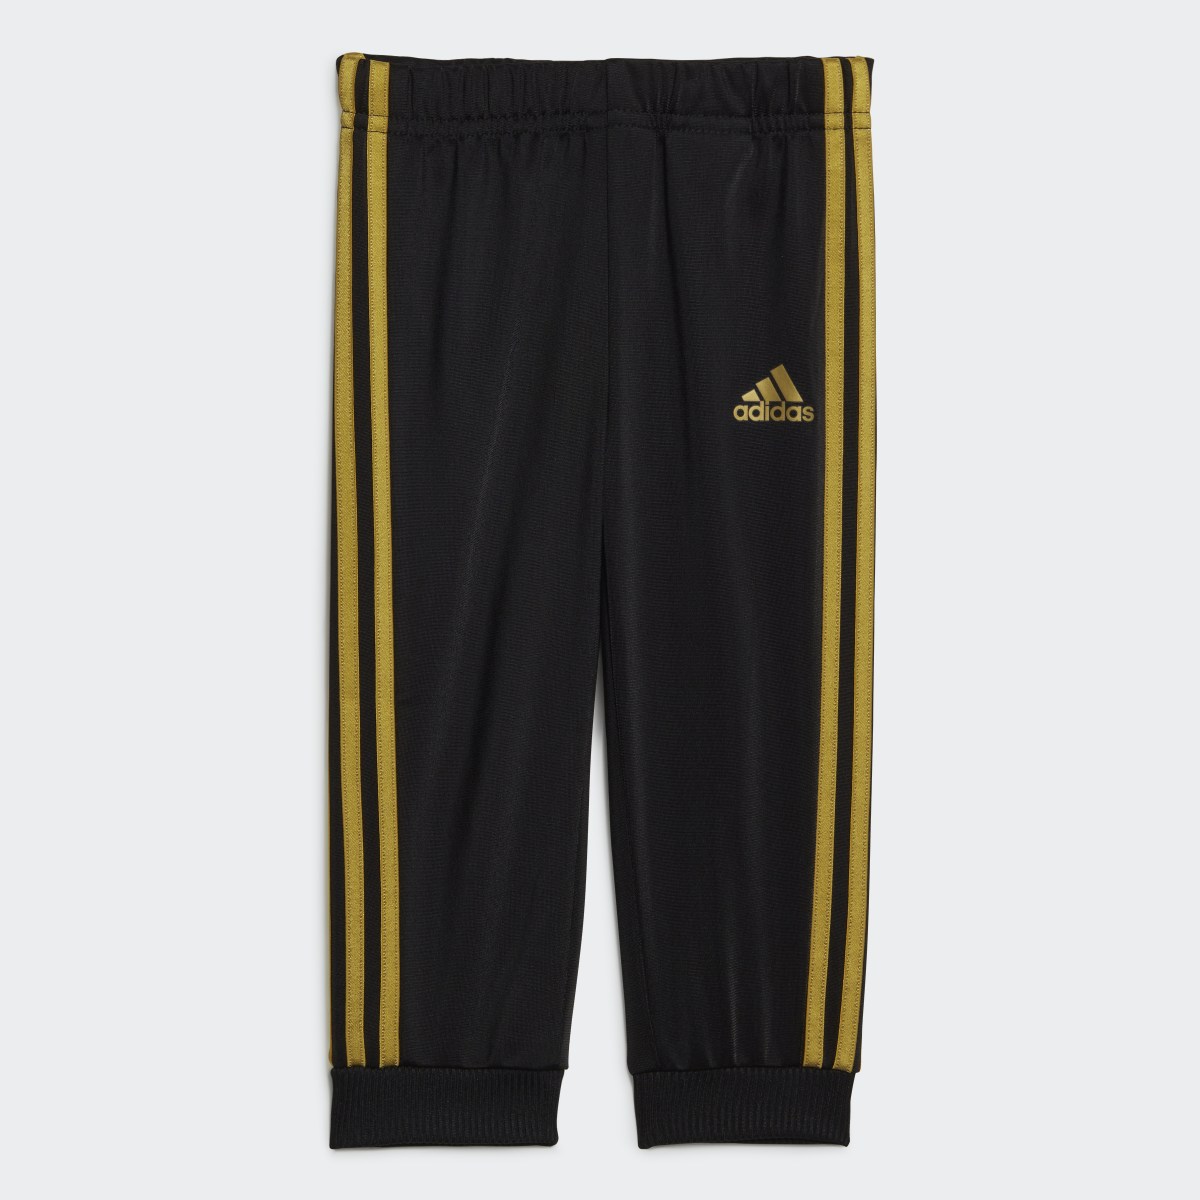 Adidas Essentials Shiny Hooded Track Suit. 5